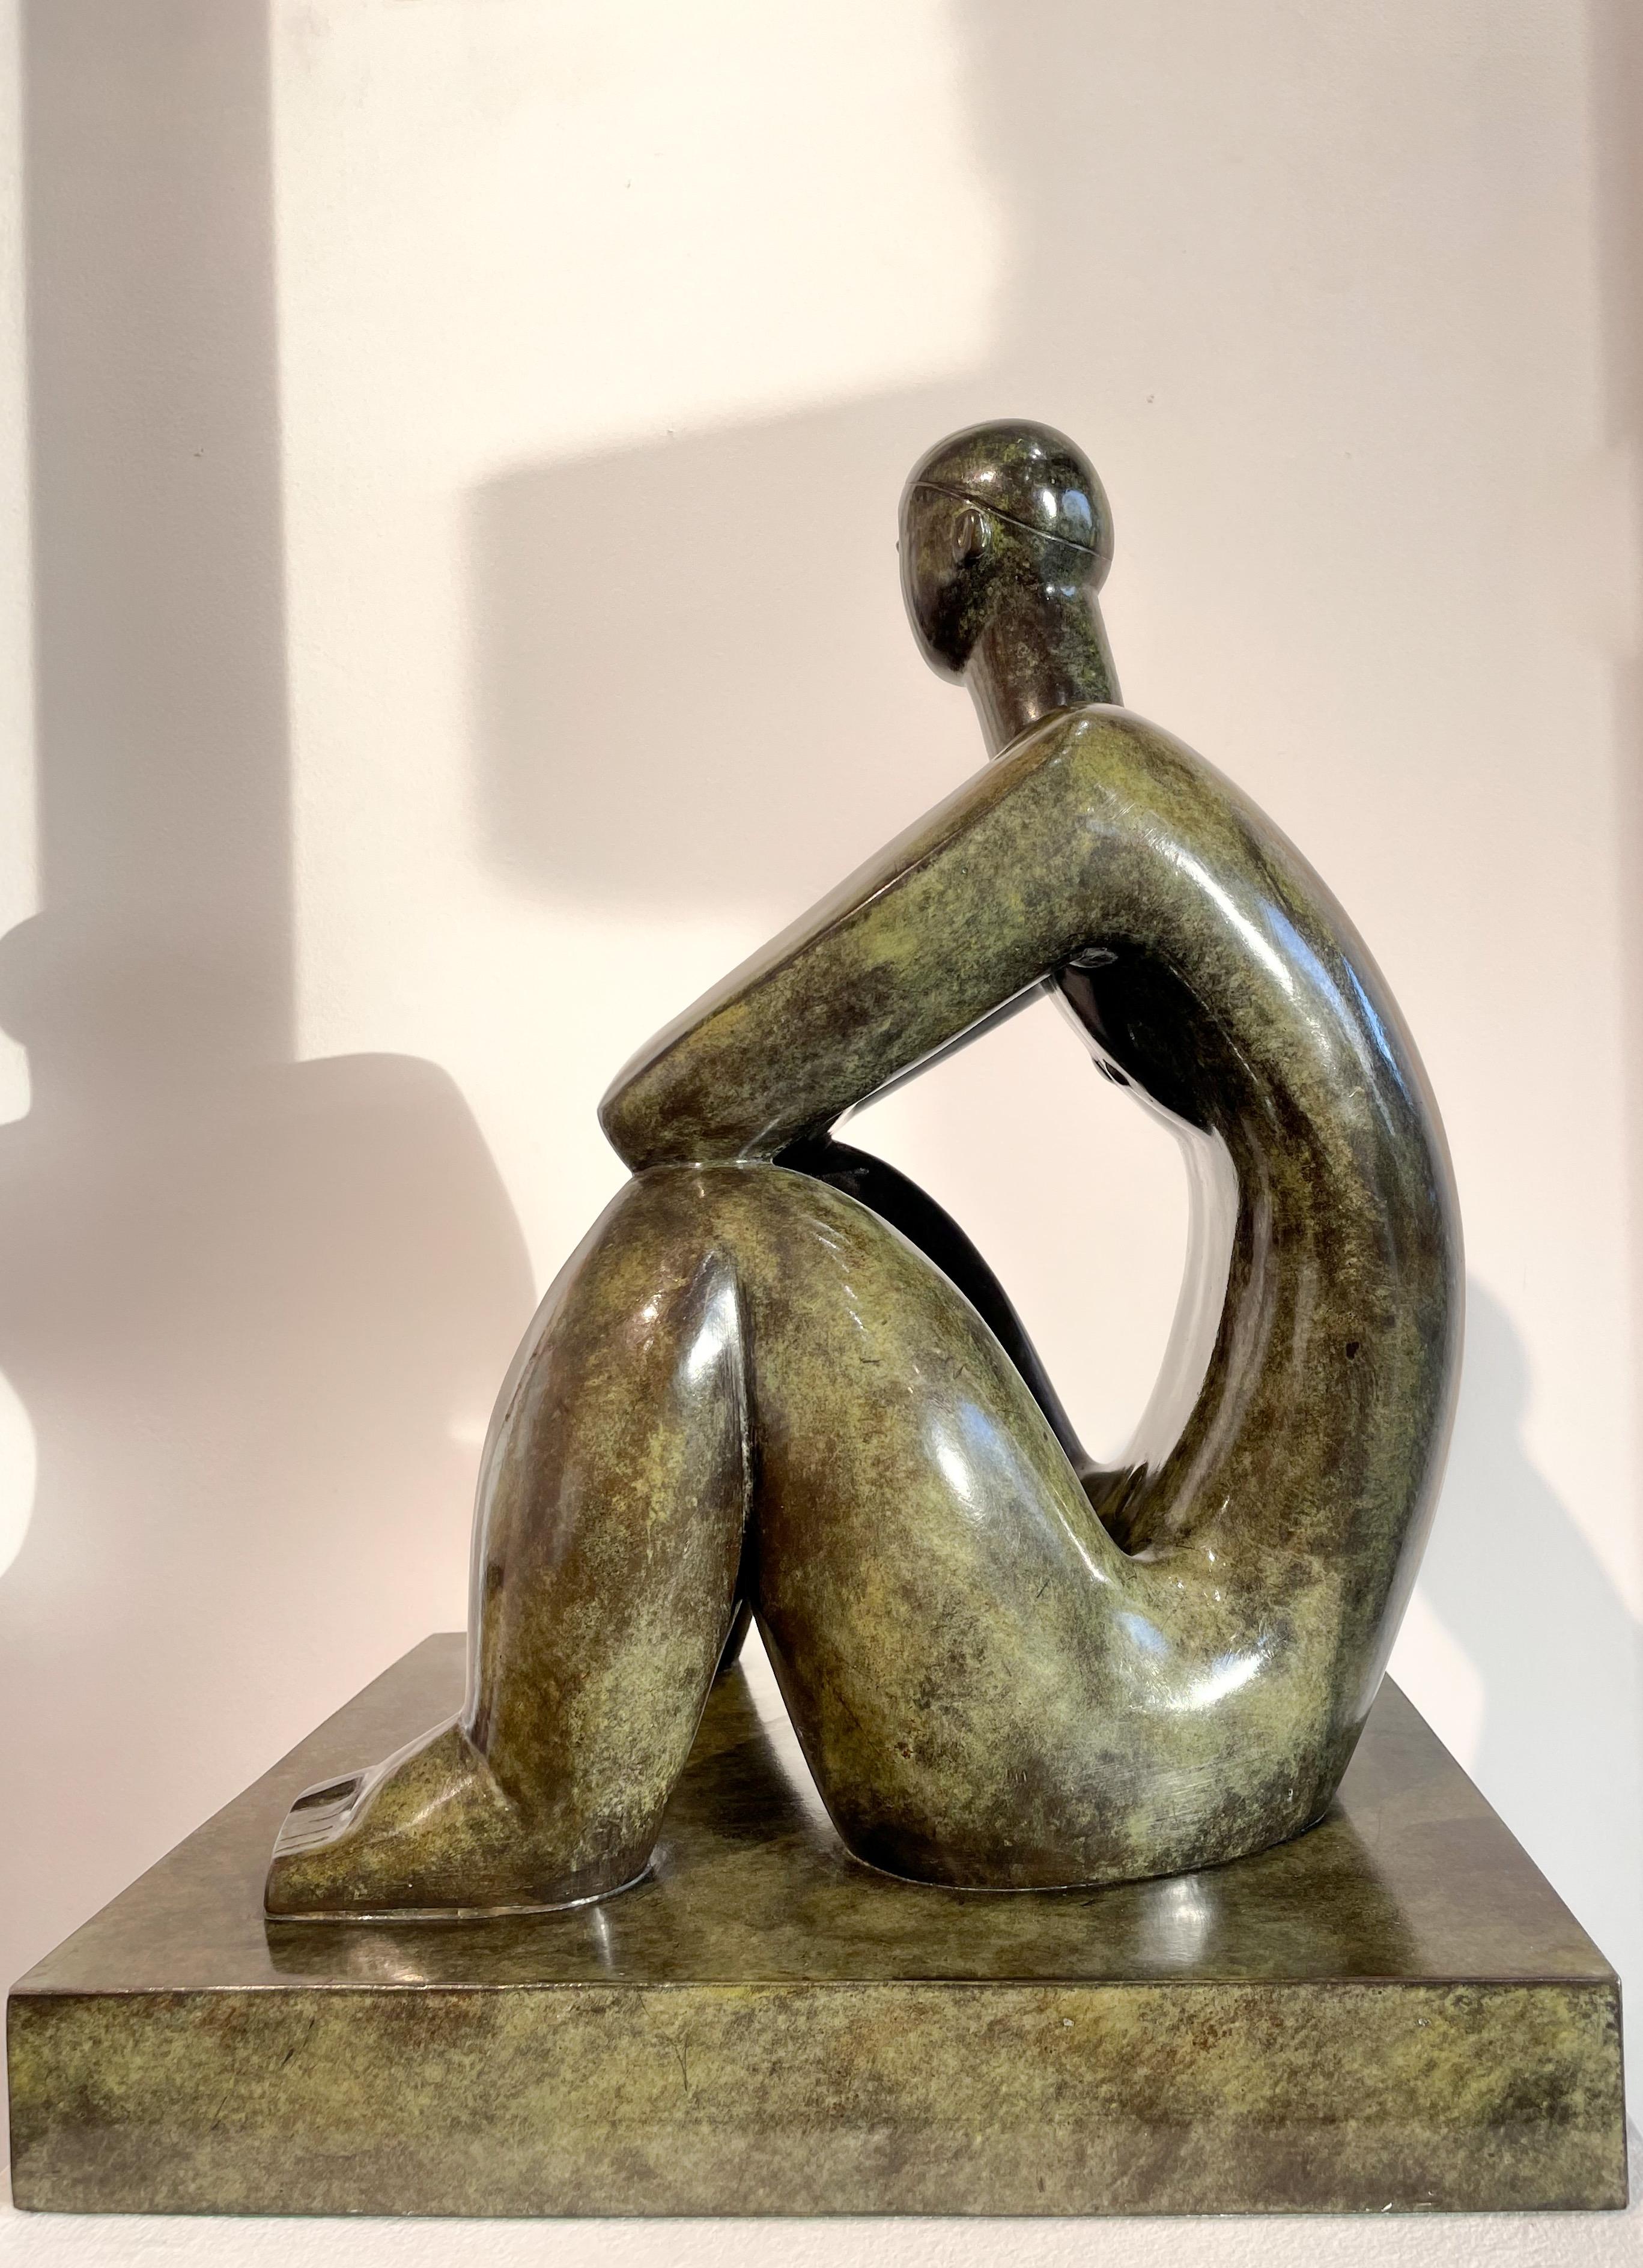 Boldi is a Hungarian sculptor born October 31, 1970 in Budapest. In 1990, he studied at the School of Fine Arts in Vienna in the sculpture section. In 1995, he graduated as a sculptor at the Hungarian School of Fine Arts in Budapest The characters